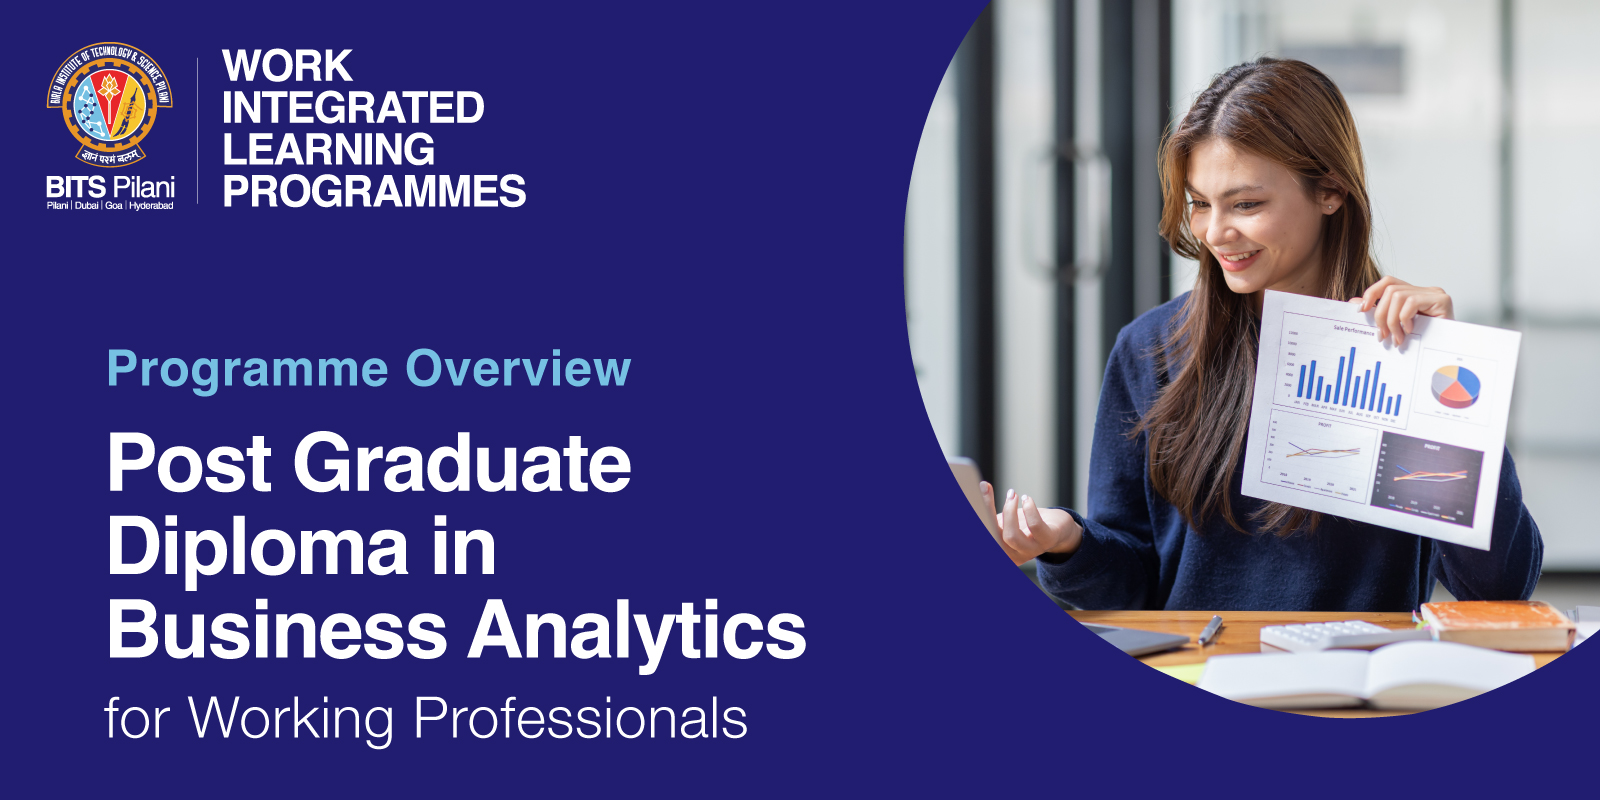 Post Graduate Diploma in Business Analytics Video